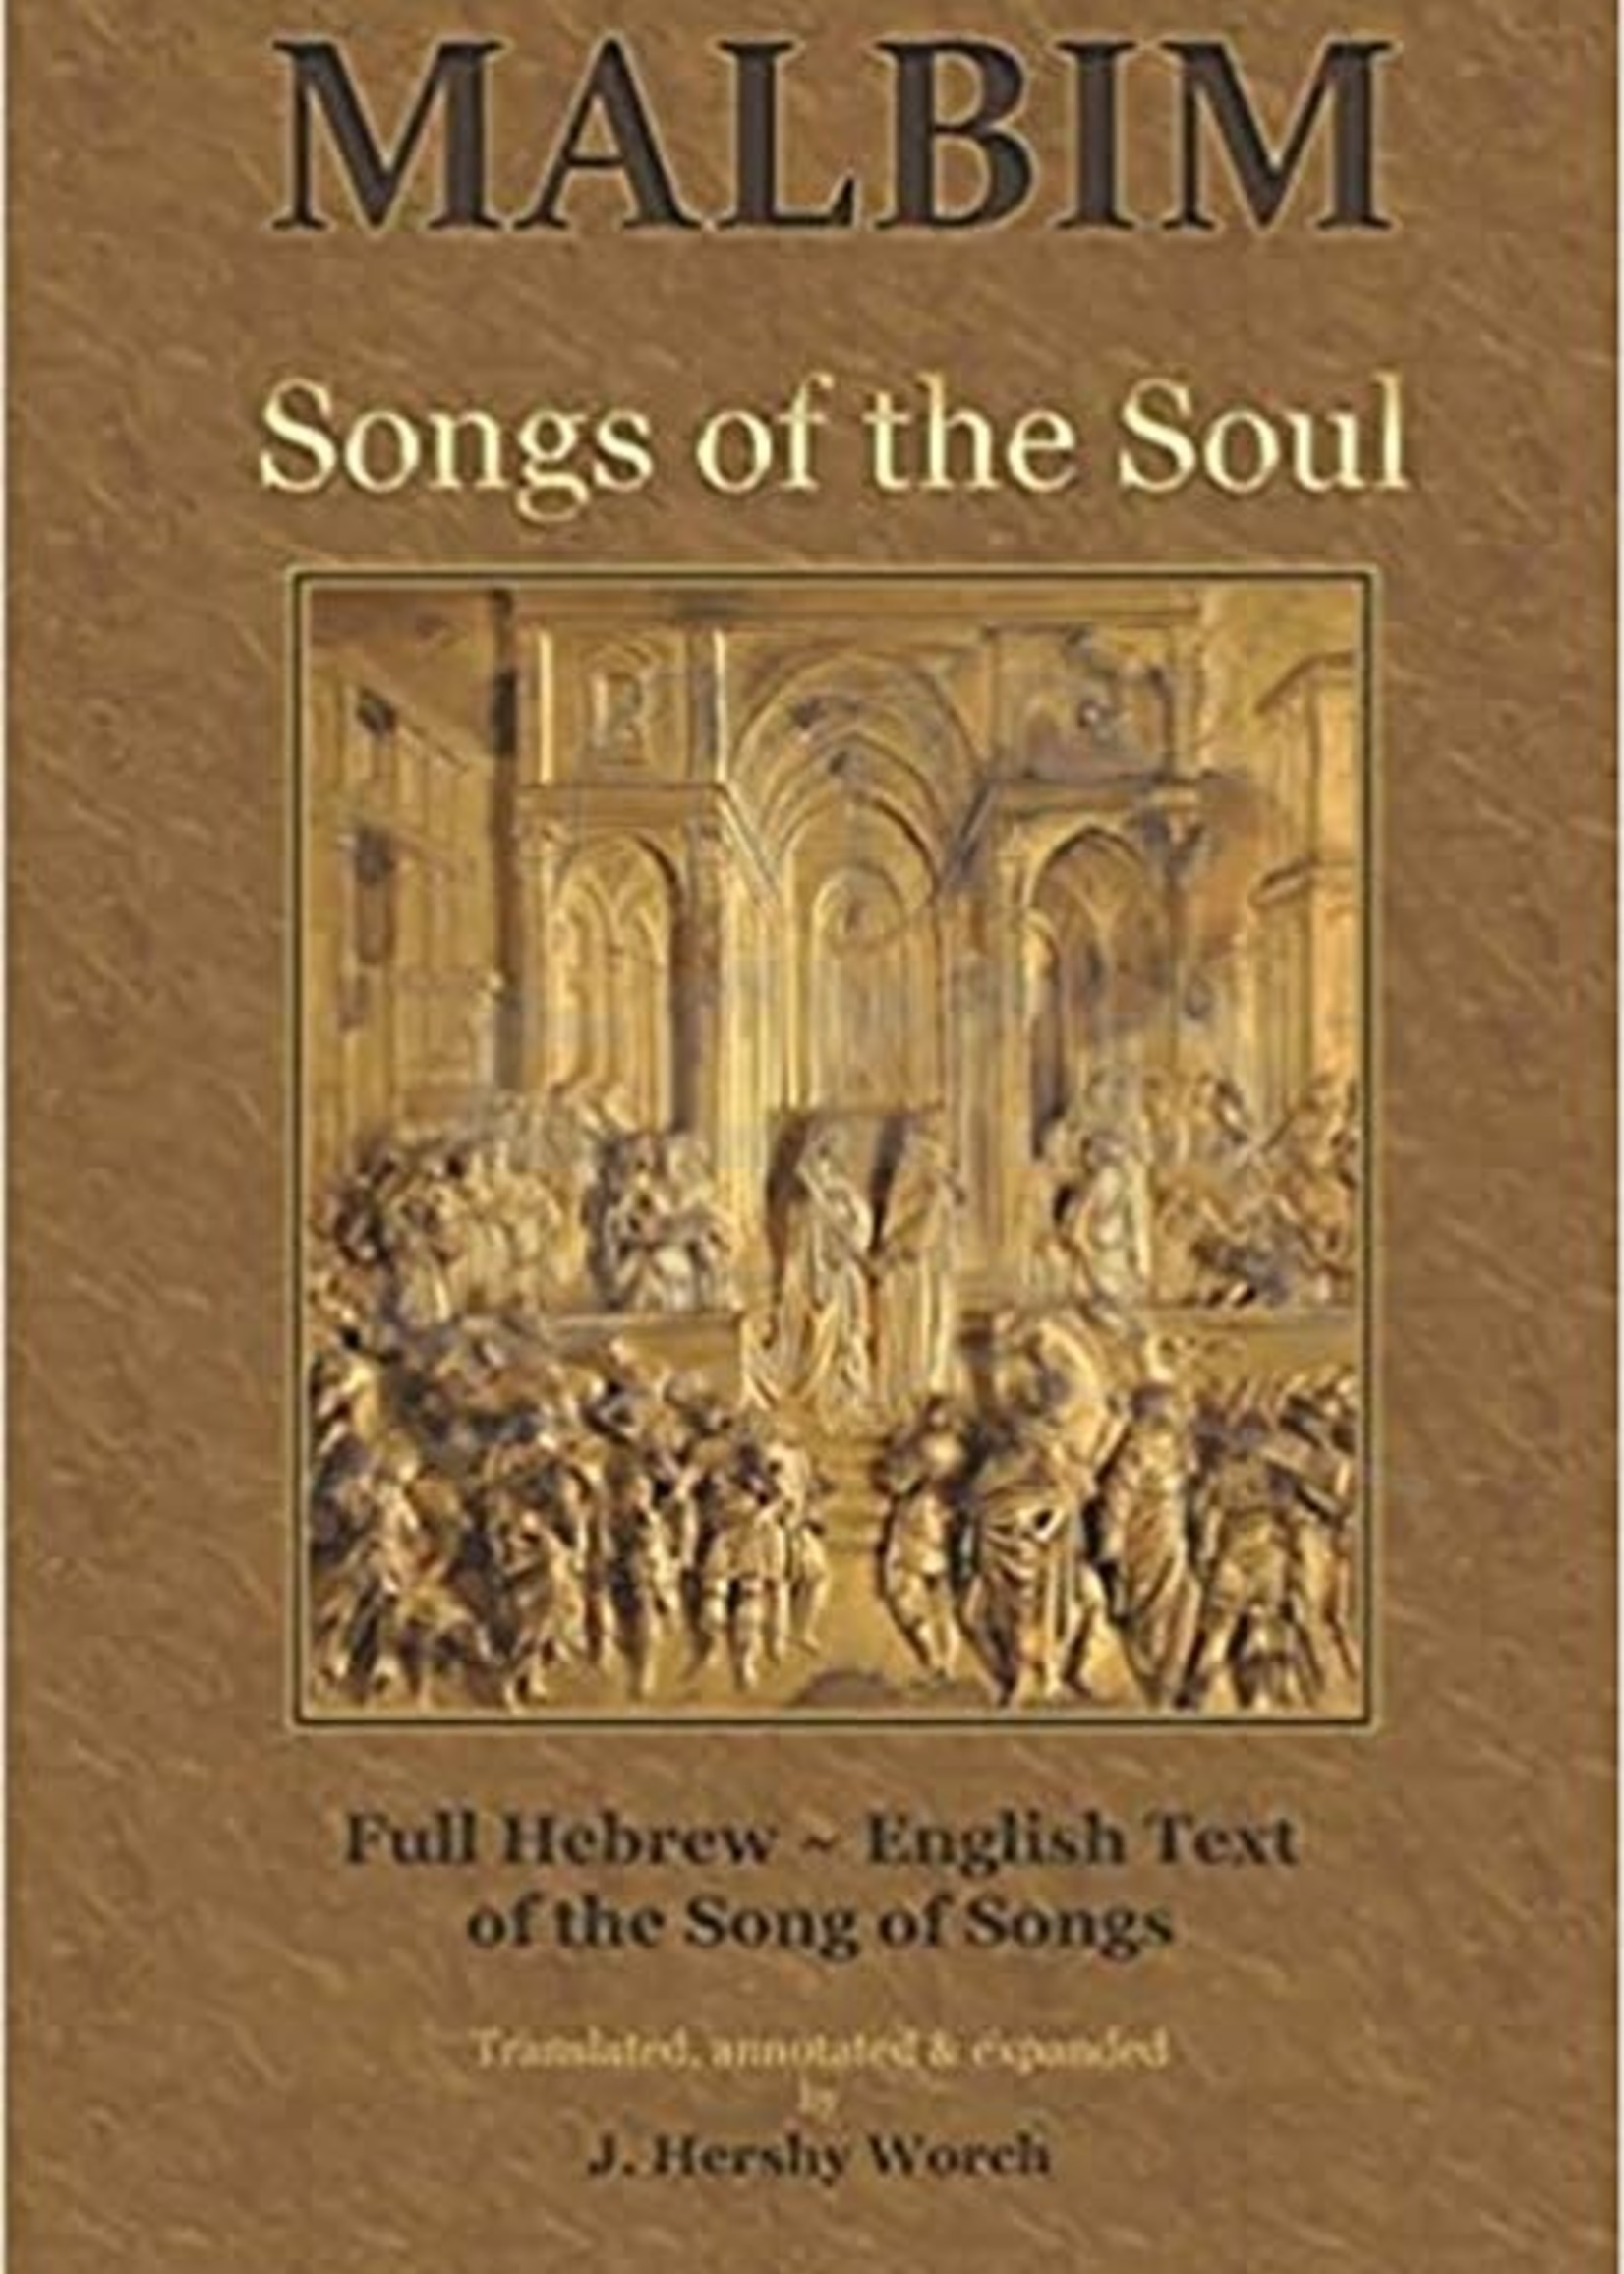 J Hershy Worch Songs Of The Soul: Malbim commentary to Canticles (Shir HaShirim)